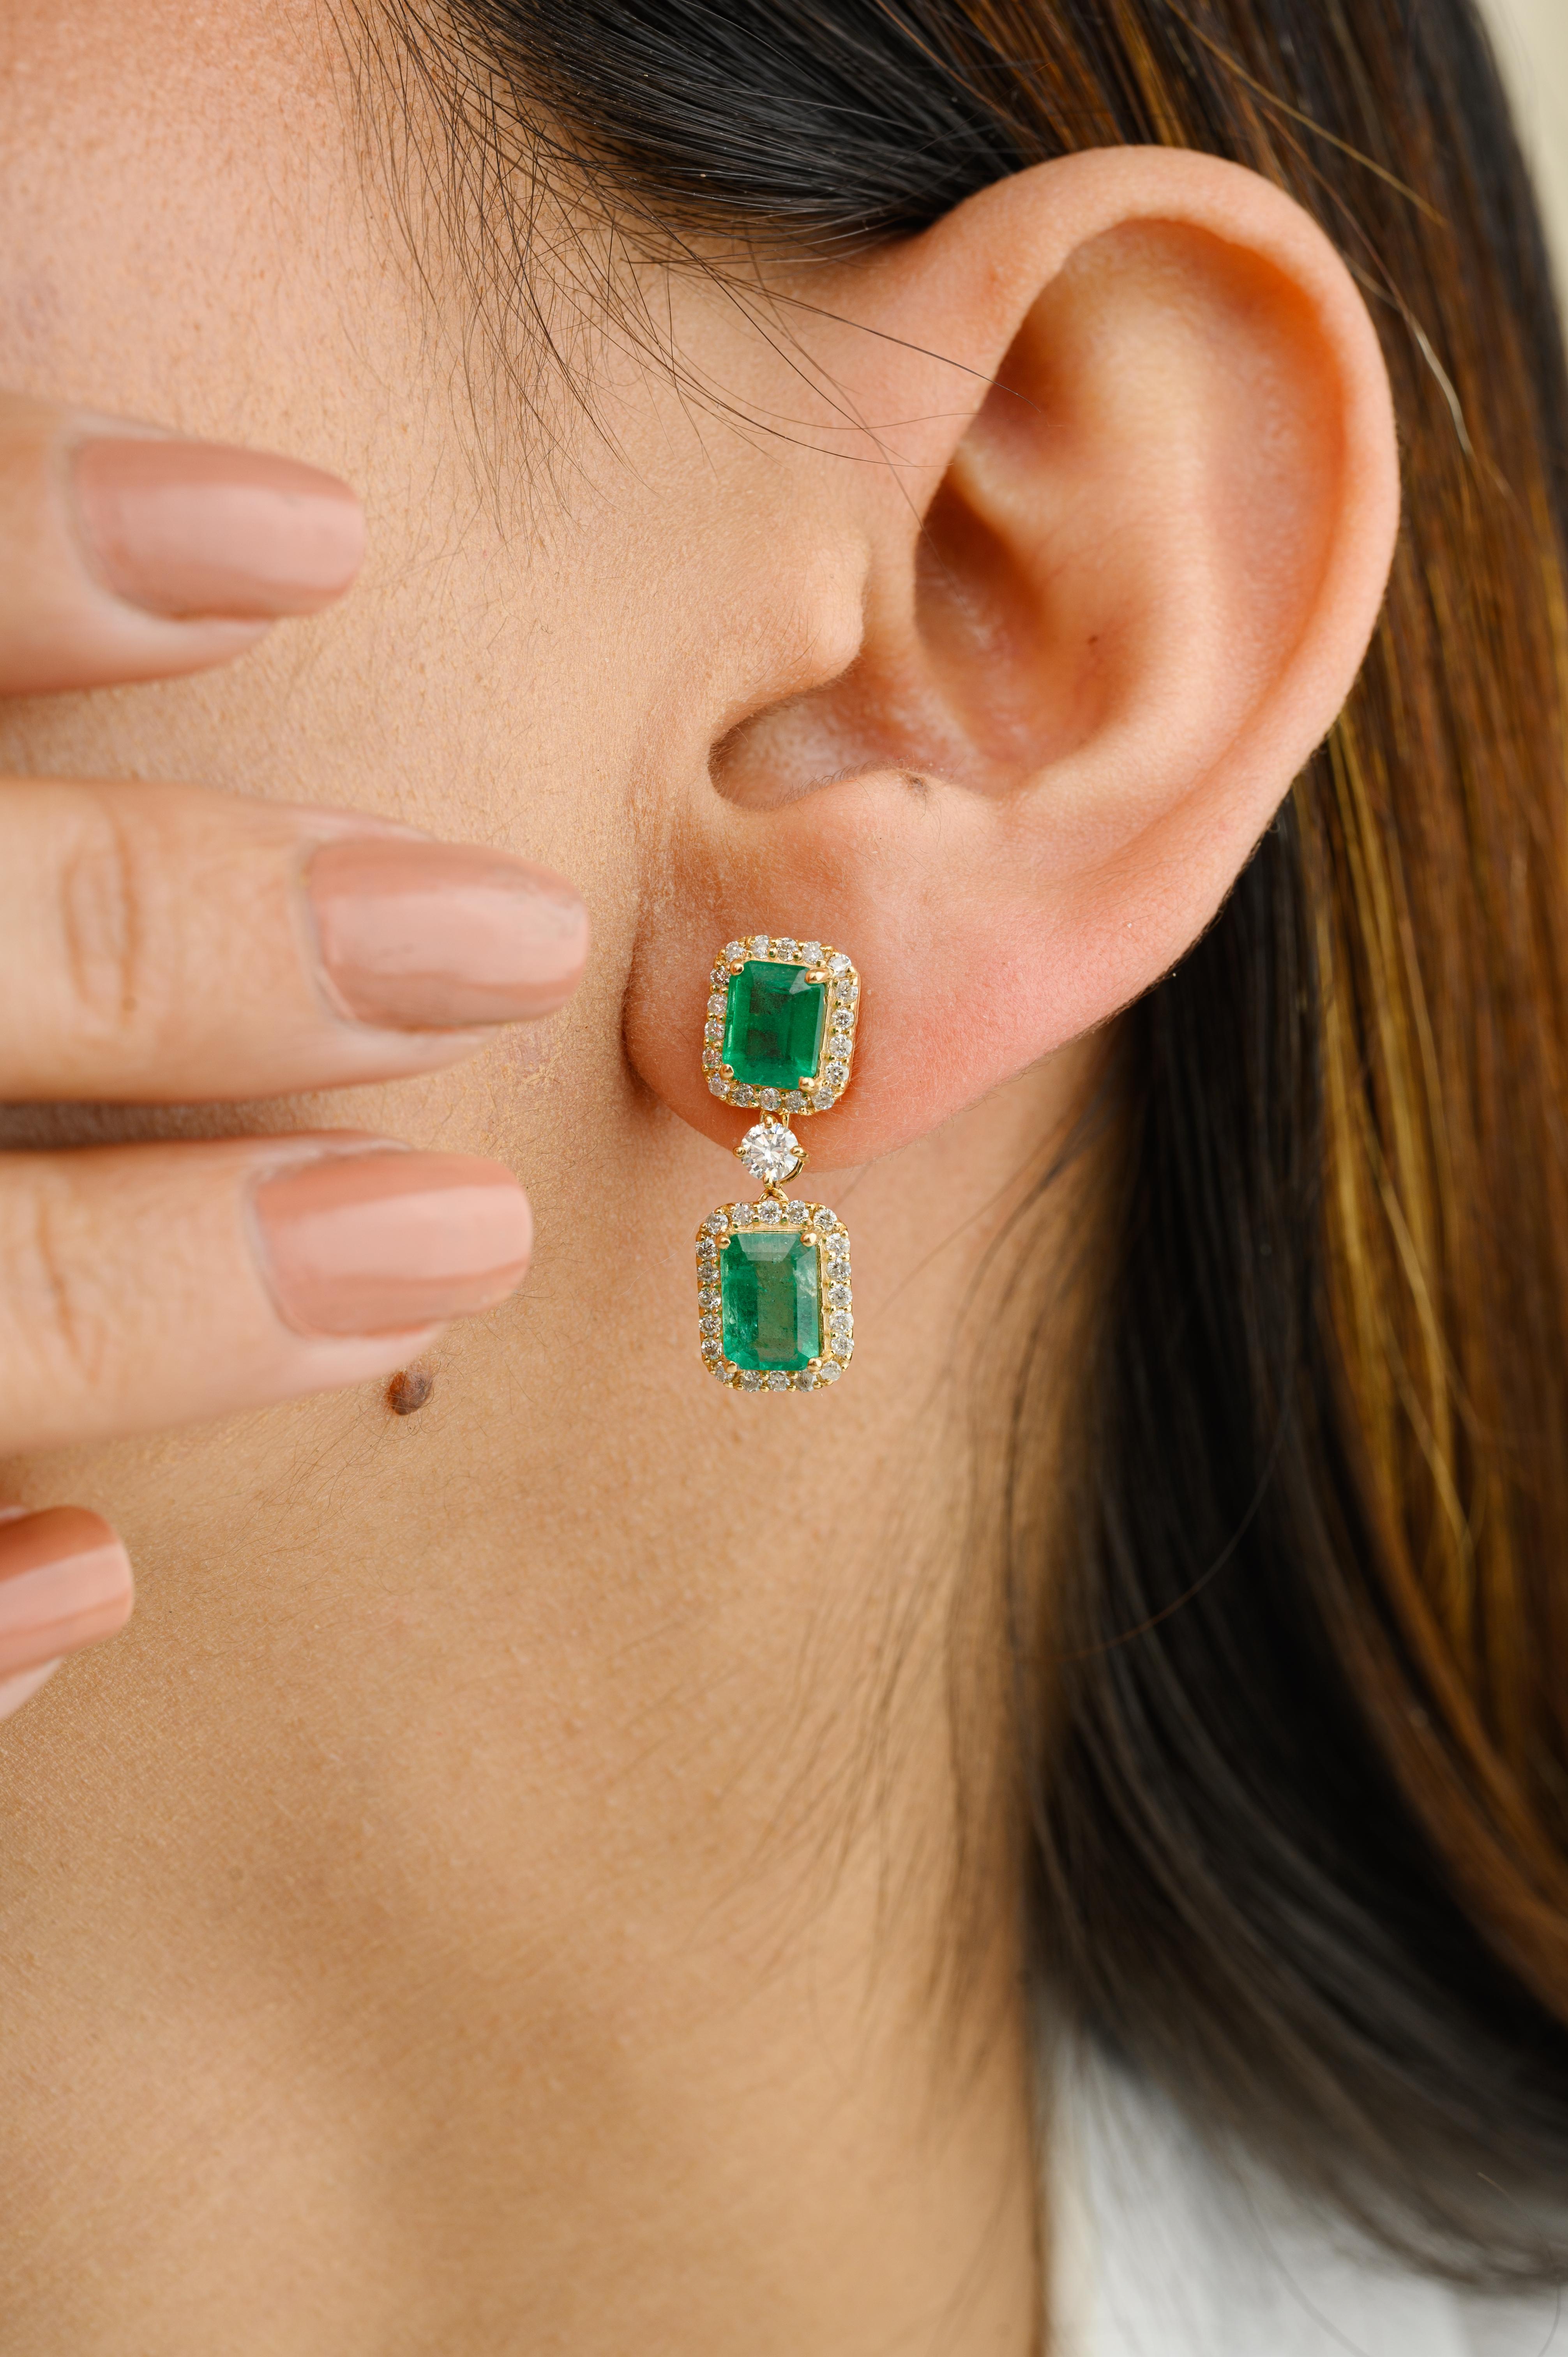 3.77 Carat Real Emerald and Halo Diamond Dangle Earrings in 18K Gold to make a statement with your look. You shall need dangle earrings to make a statement with your look. These earrings create a sparkling, luxurious look featuring octagon cut